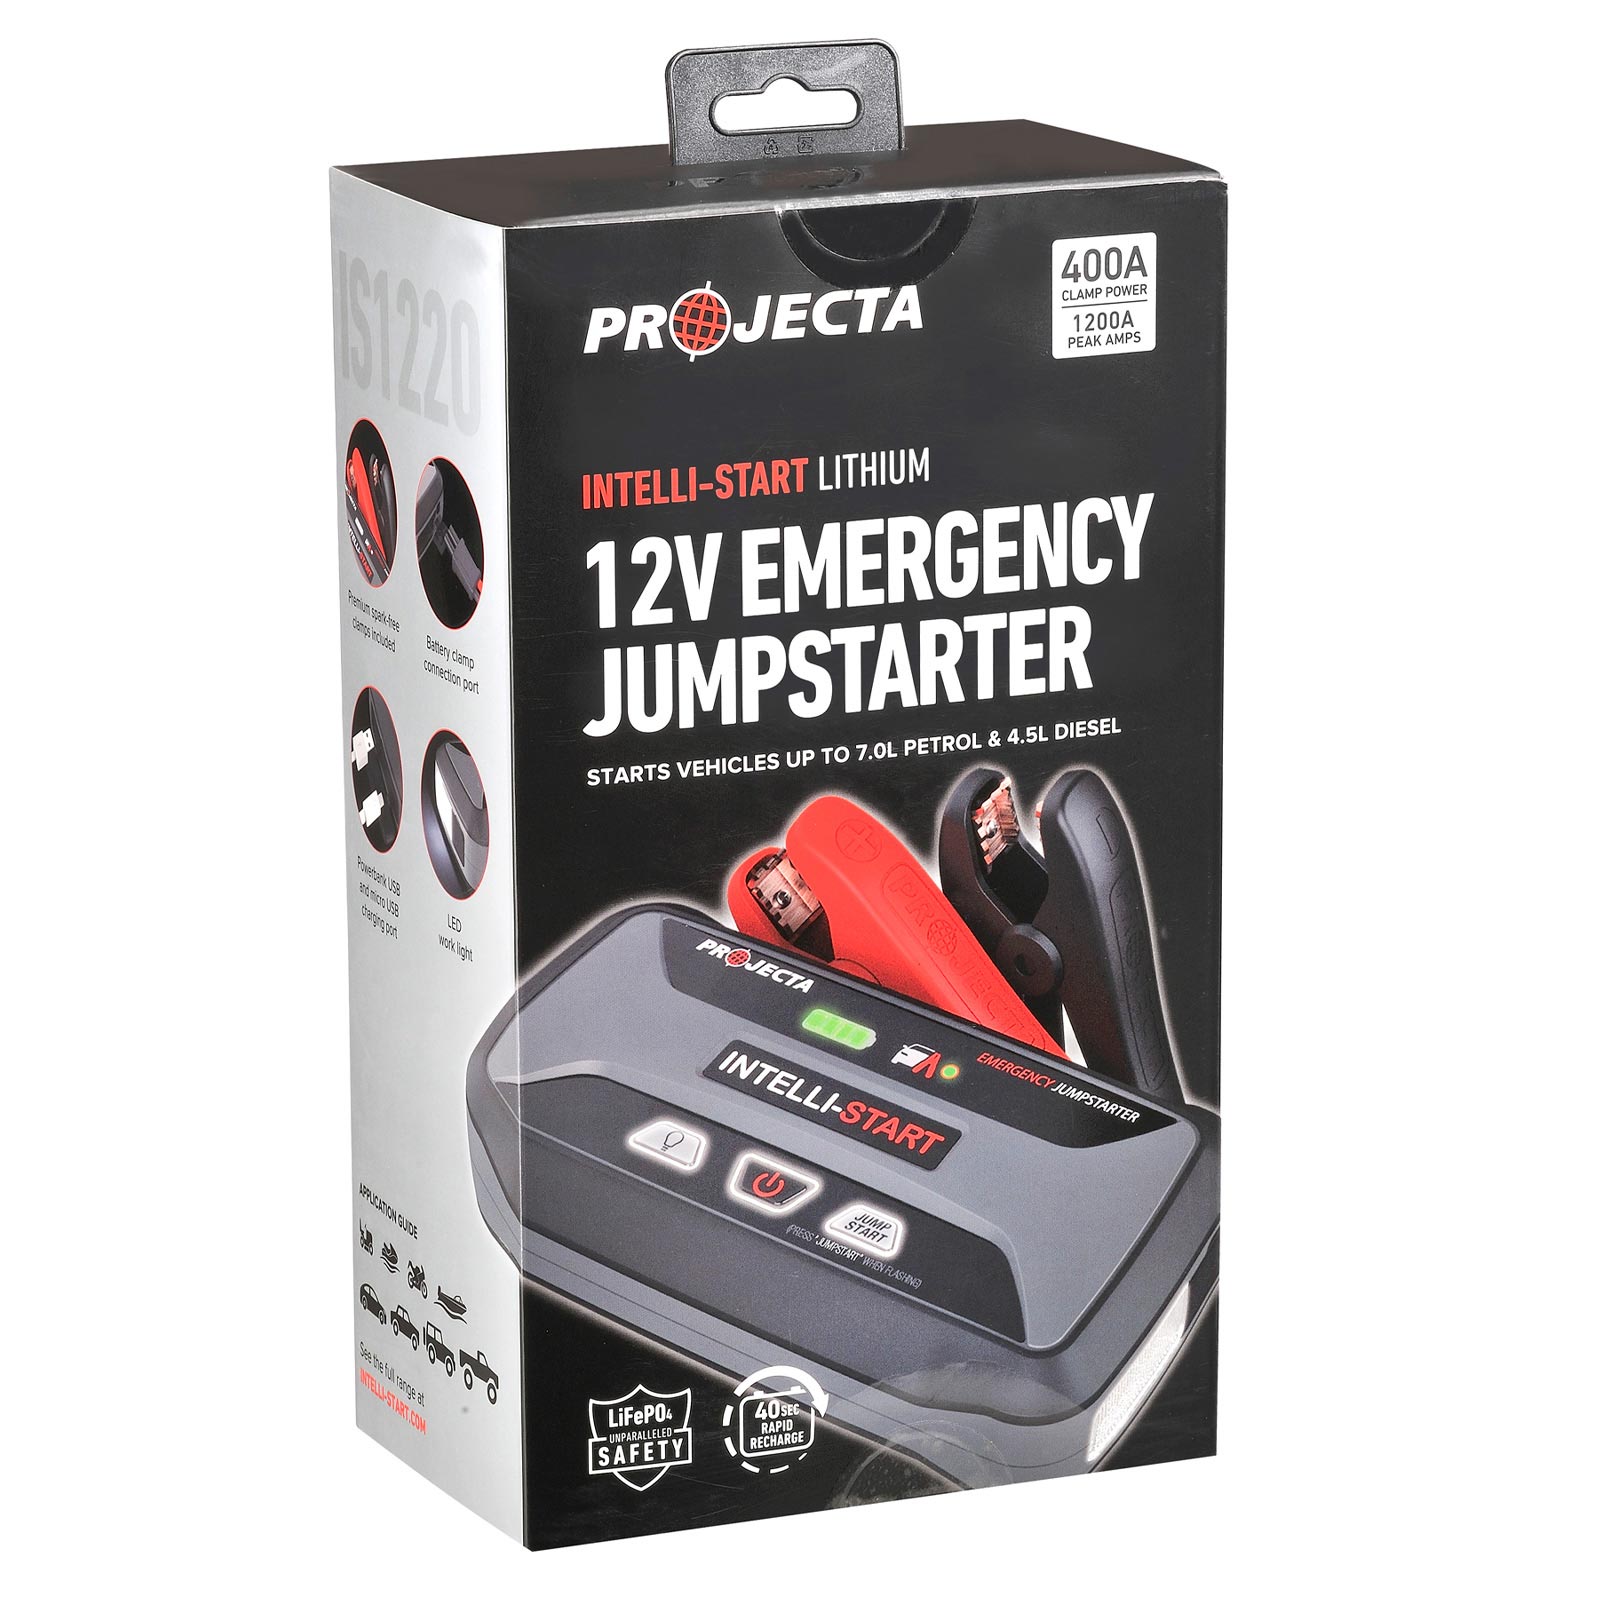 Projecta JumpStarter & Power Bank IS1220 - 12V 1200A Intelli-Start  Emergency Lithium Jump Starter and Power Bank - Online Boating Store - Boat  Parts